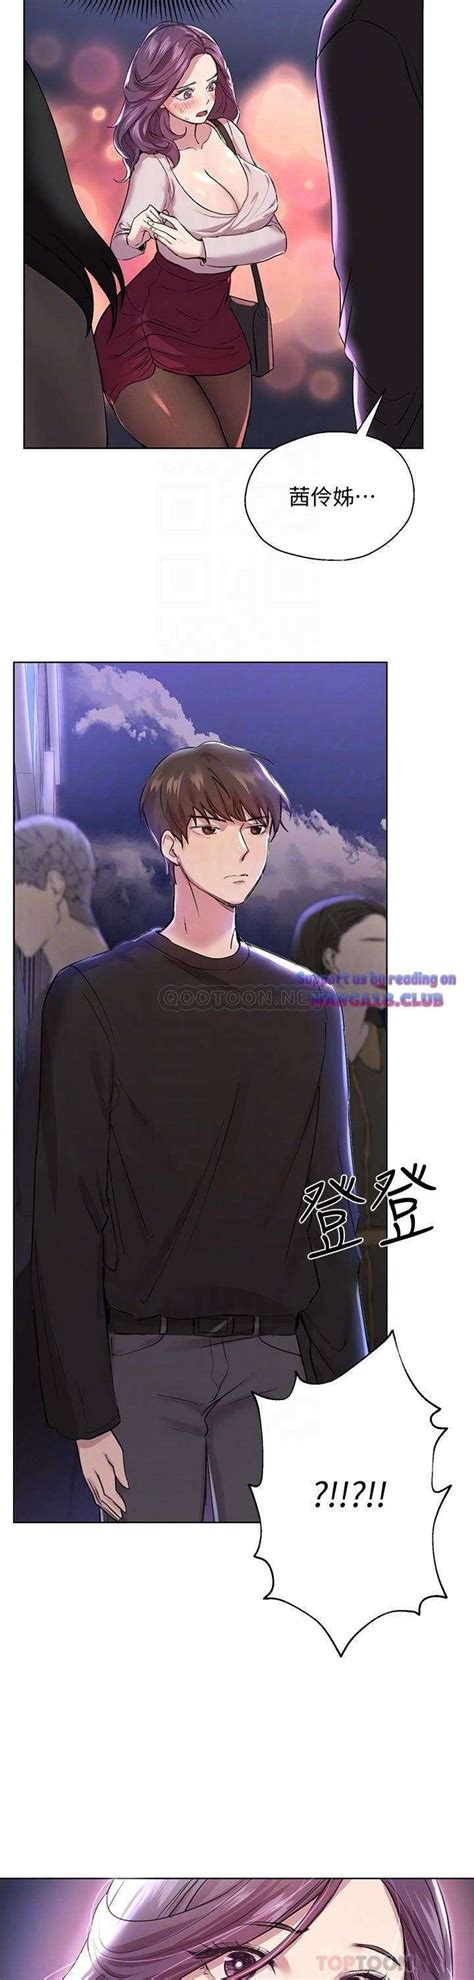 My sister friends manhwa. Suggestions: You are reading Chapter 22. Click in My Sister's Friends - raw, click on the image to go to the next chapter or previous chapter "single page mode". you can also use the arrow keys to go to the next or previous chapter. manhwa-raw.com is the best place to read Chapter 22 Free online. 